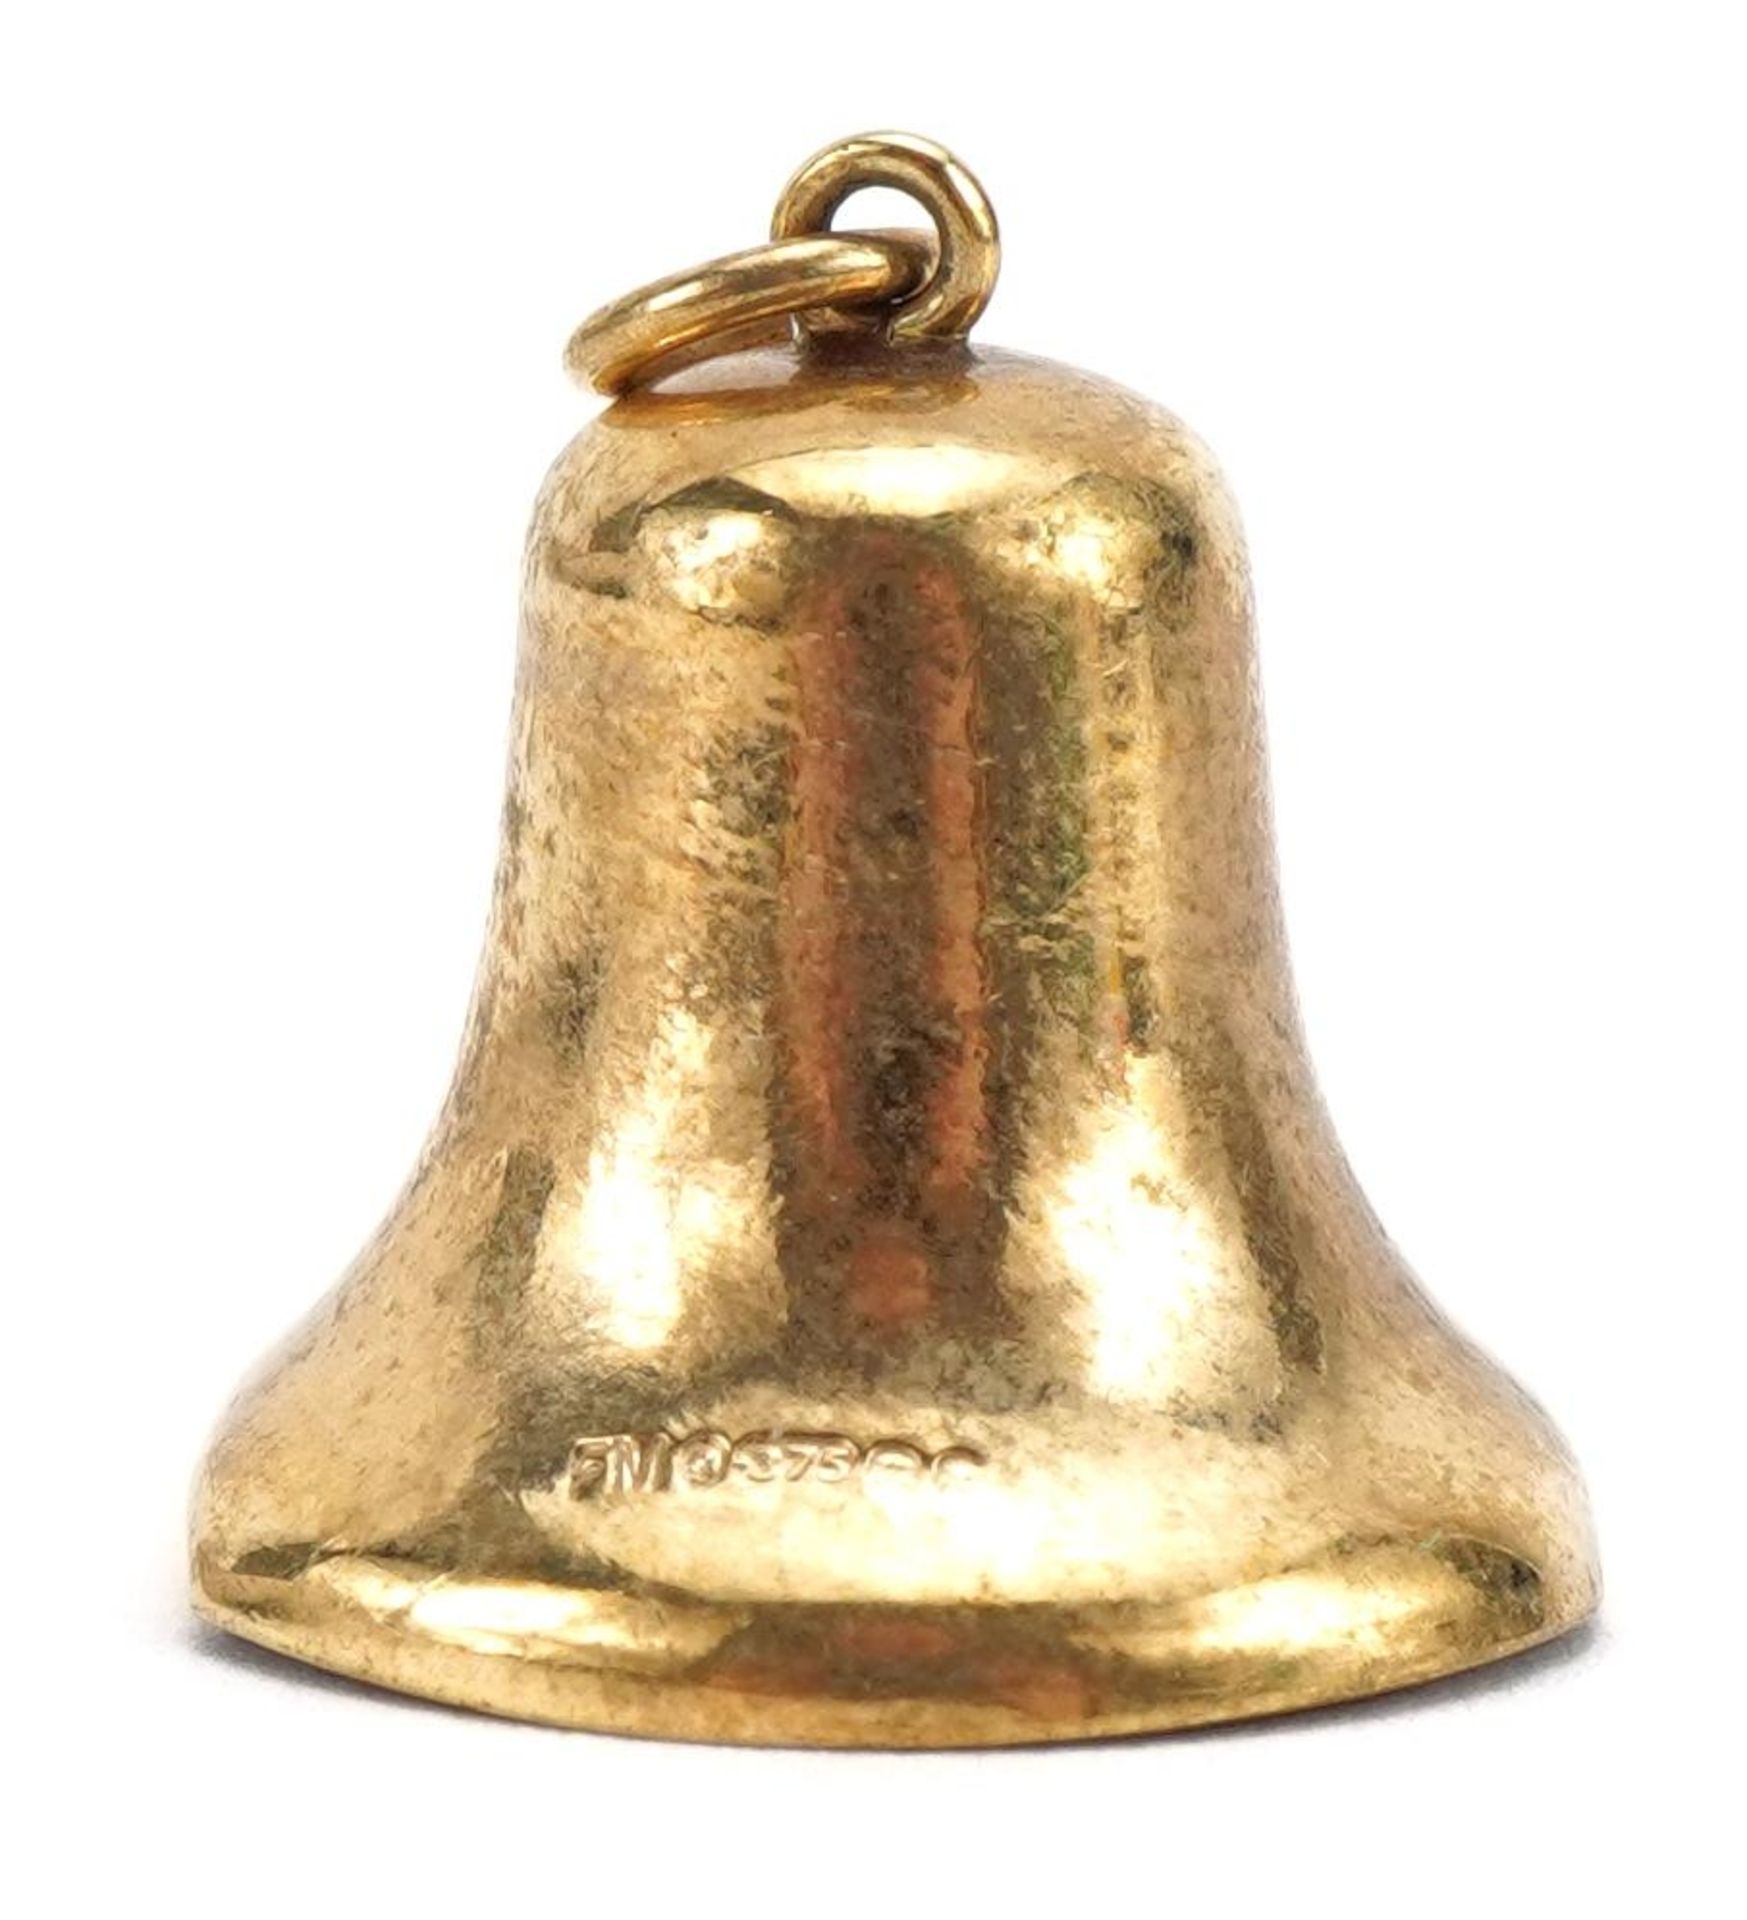 9ct gold bell charm, 1.8cm high, 1.3g : For further information on this lot please contact the - Image 2 of 4